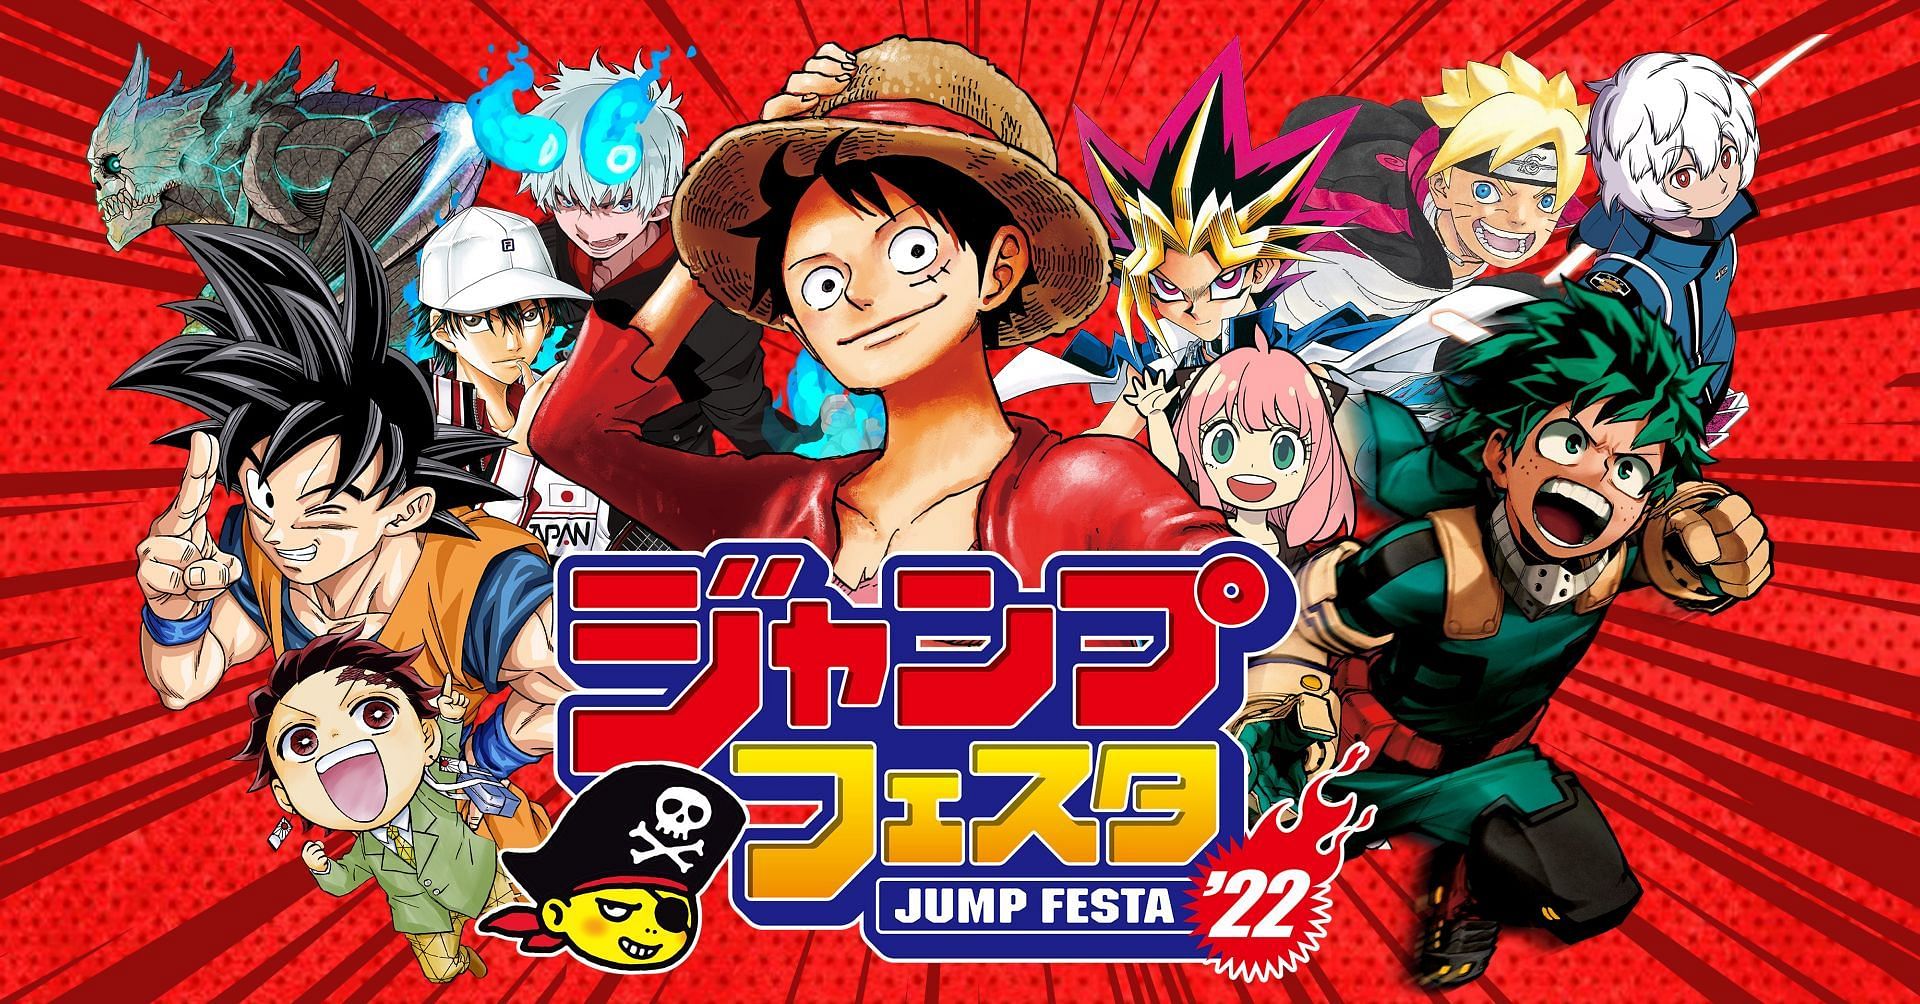 The promotional image for Jump Festa &rsquo;22, which took place on December 19 and 20 (Image via Shueisha)